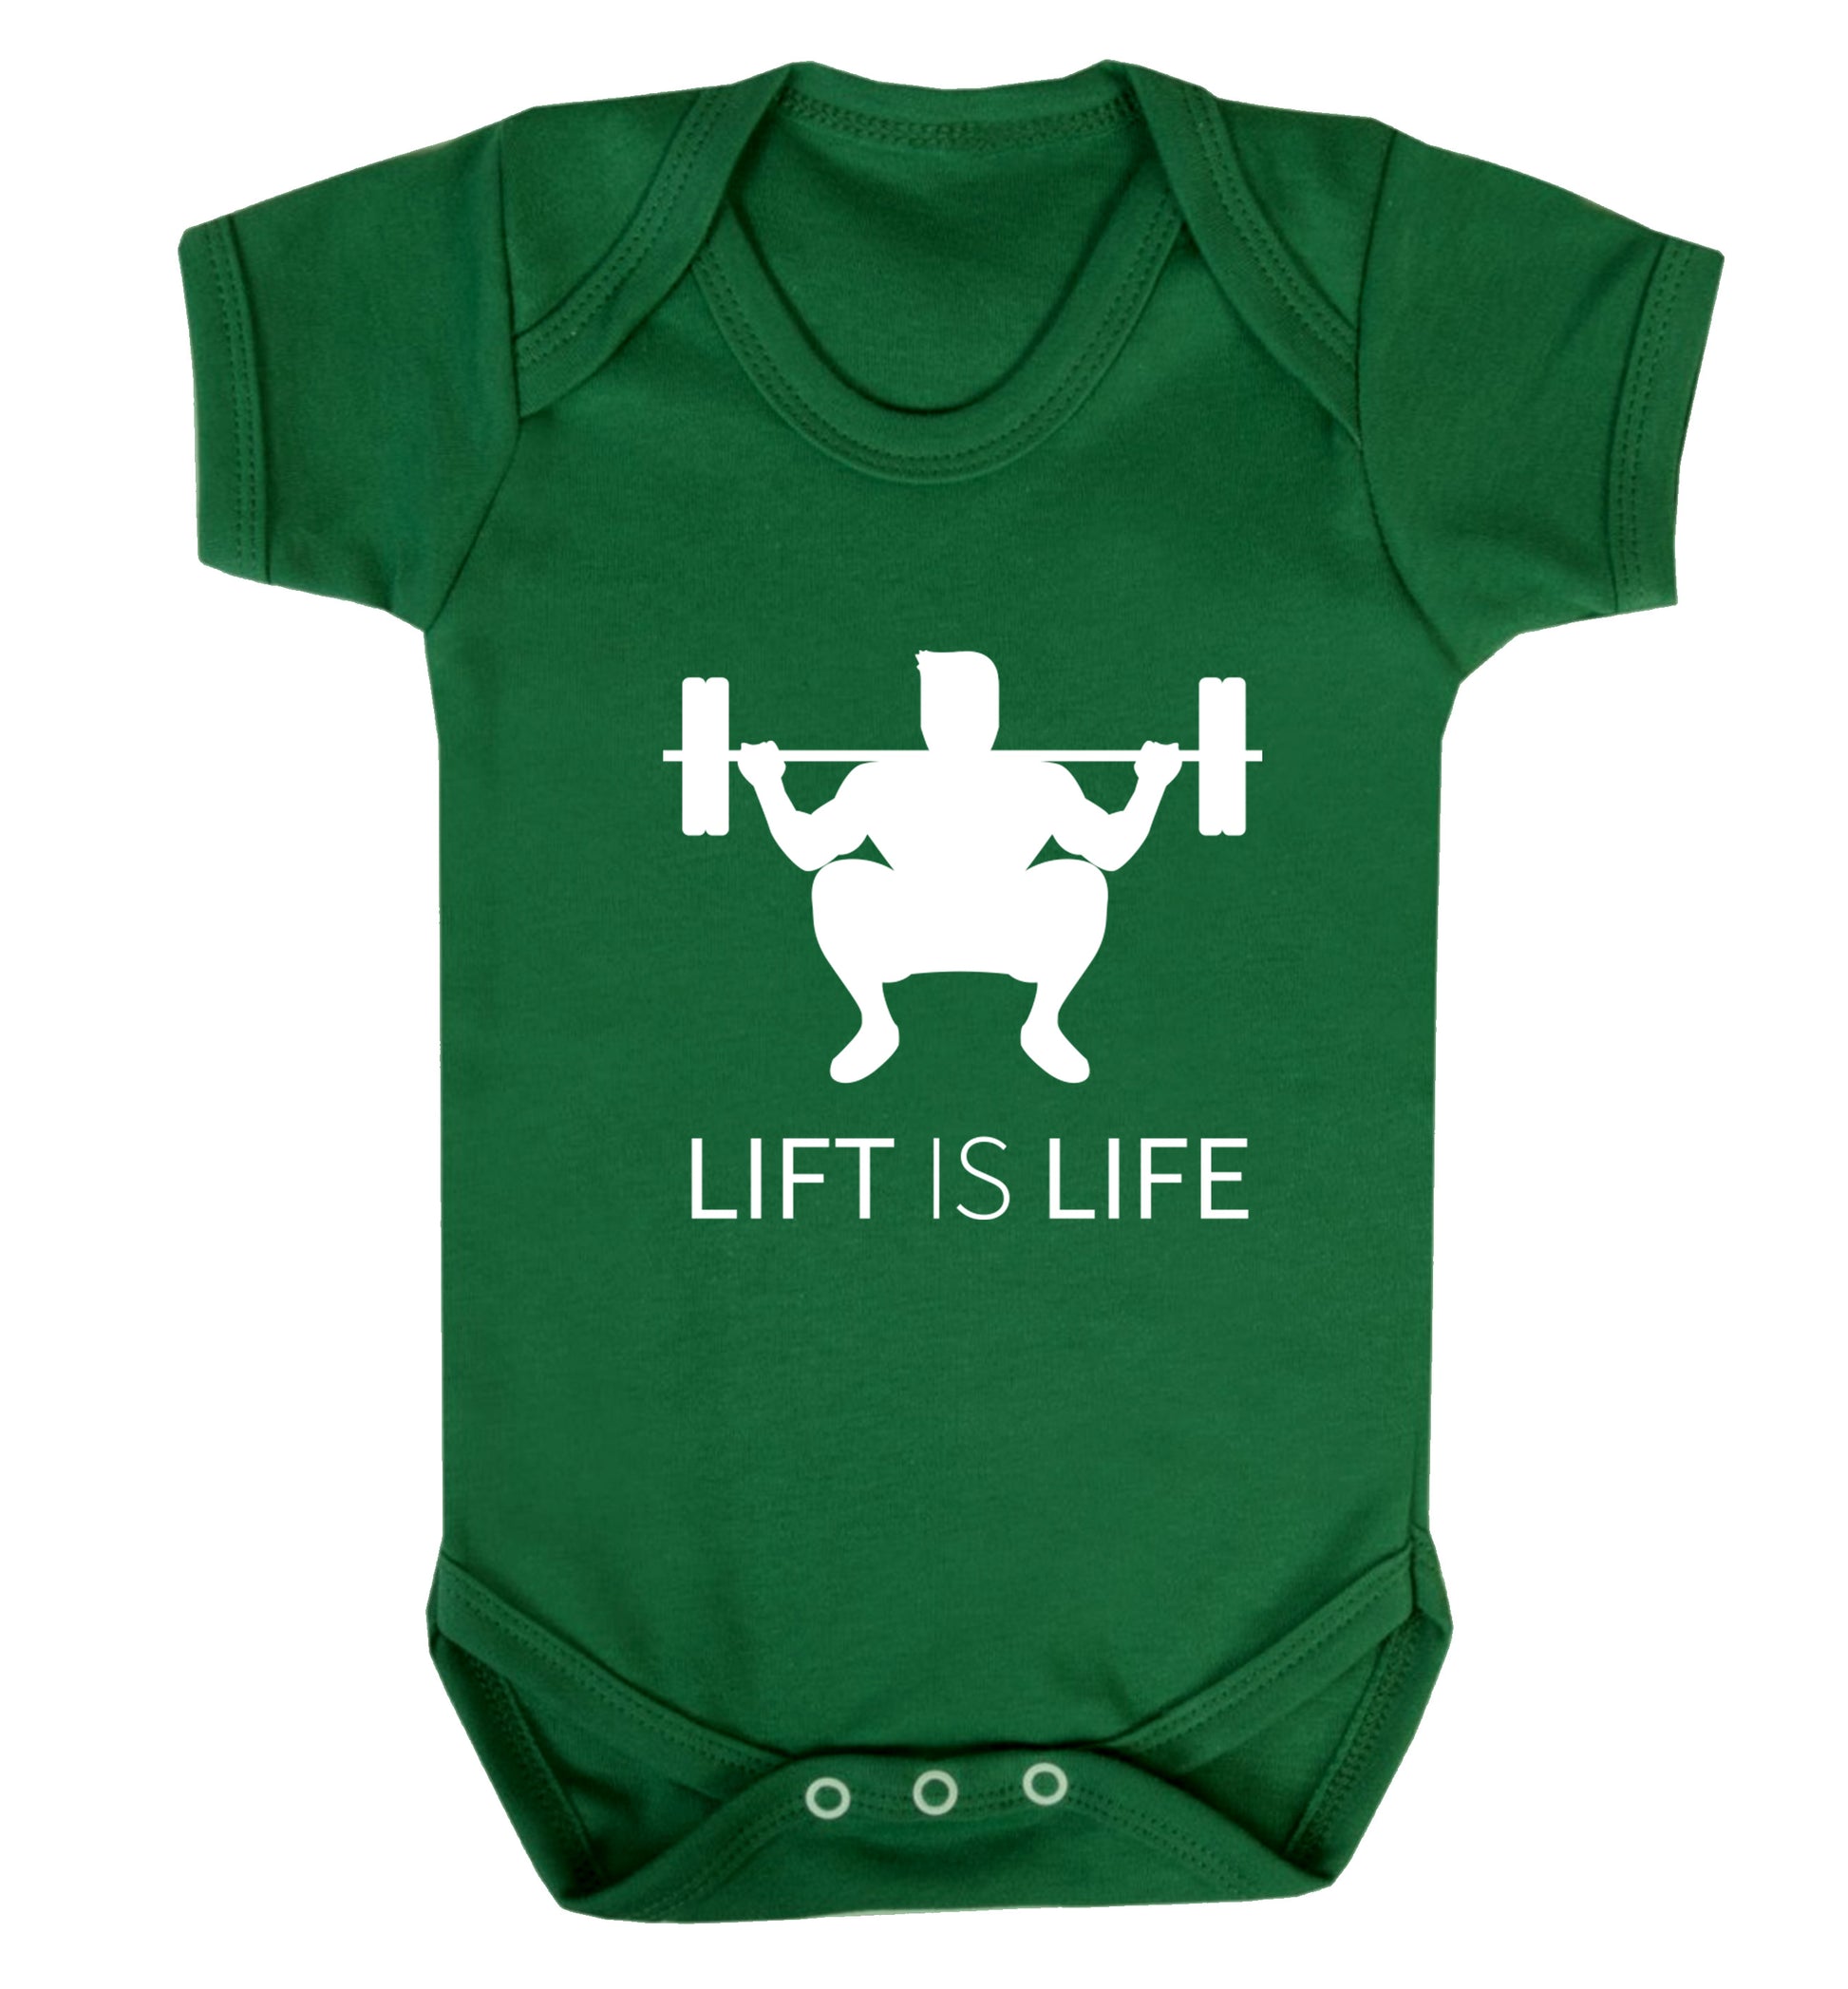 Lift is life Baby Vest green 18-24 months